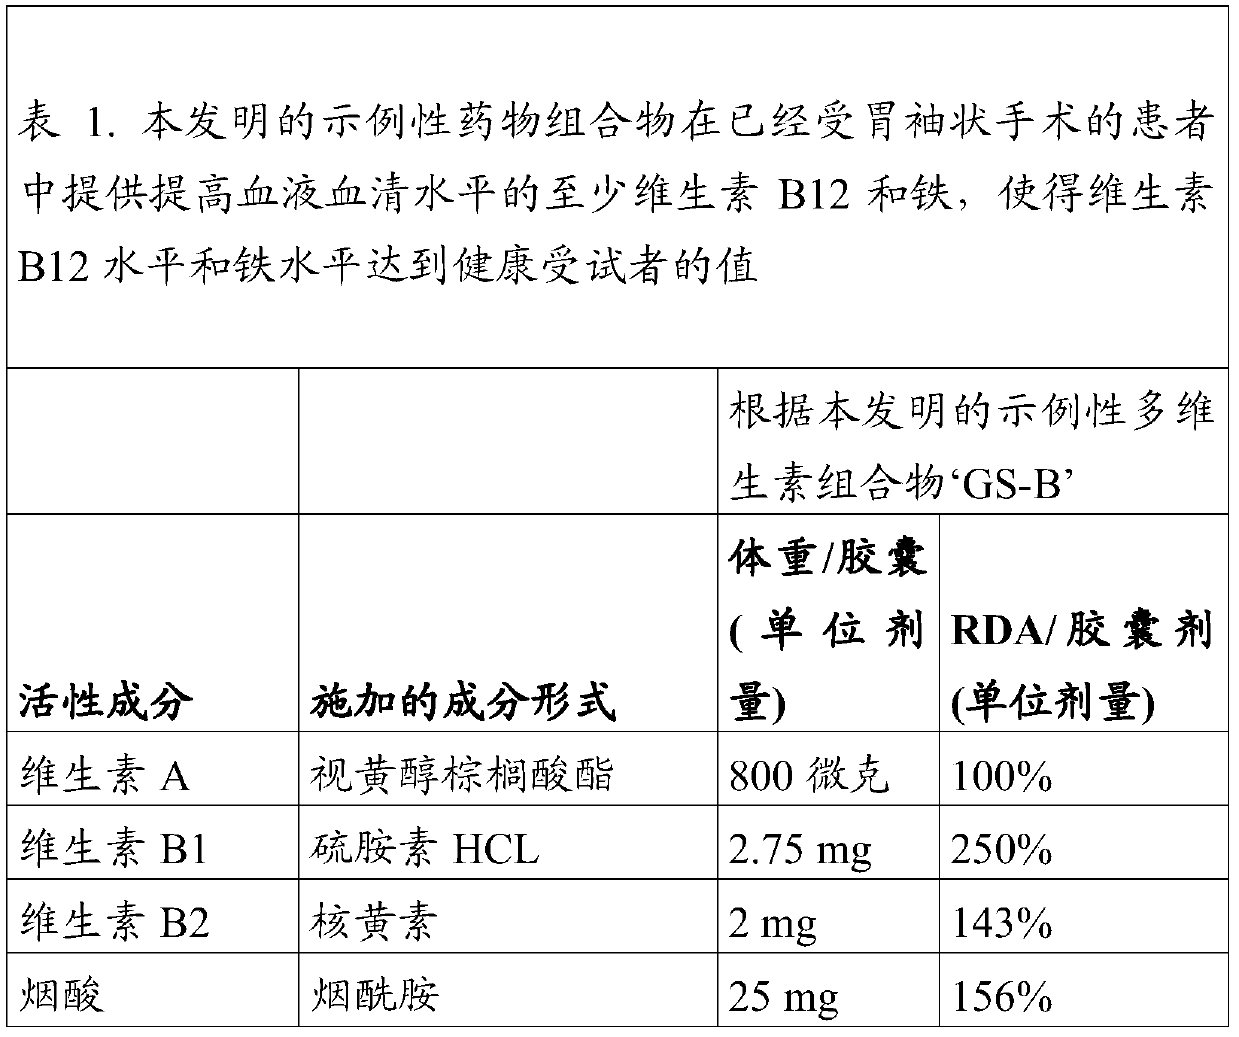 Pharmaceutical composition for use in treatment or prevention of vitamin deficiency and mineral deficiency in patients who have been subjected to gastric sleeve surgery